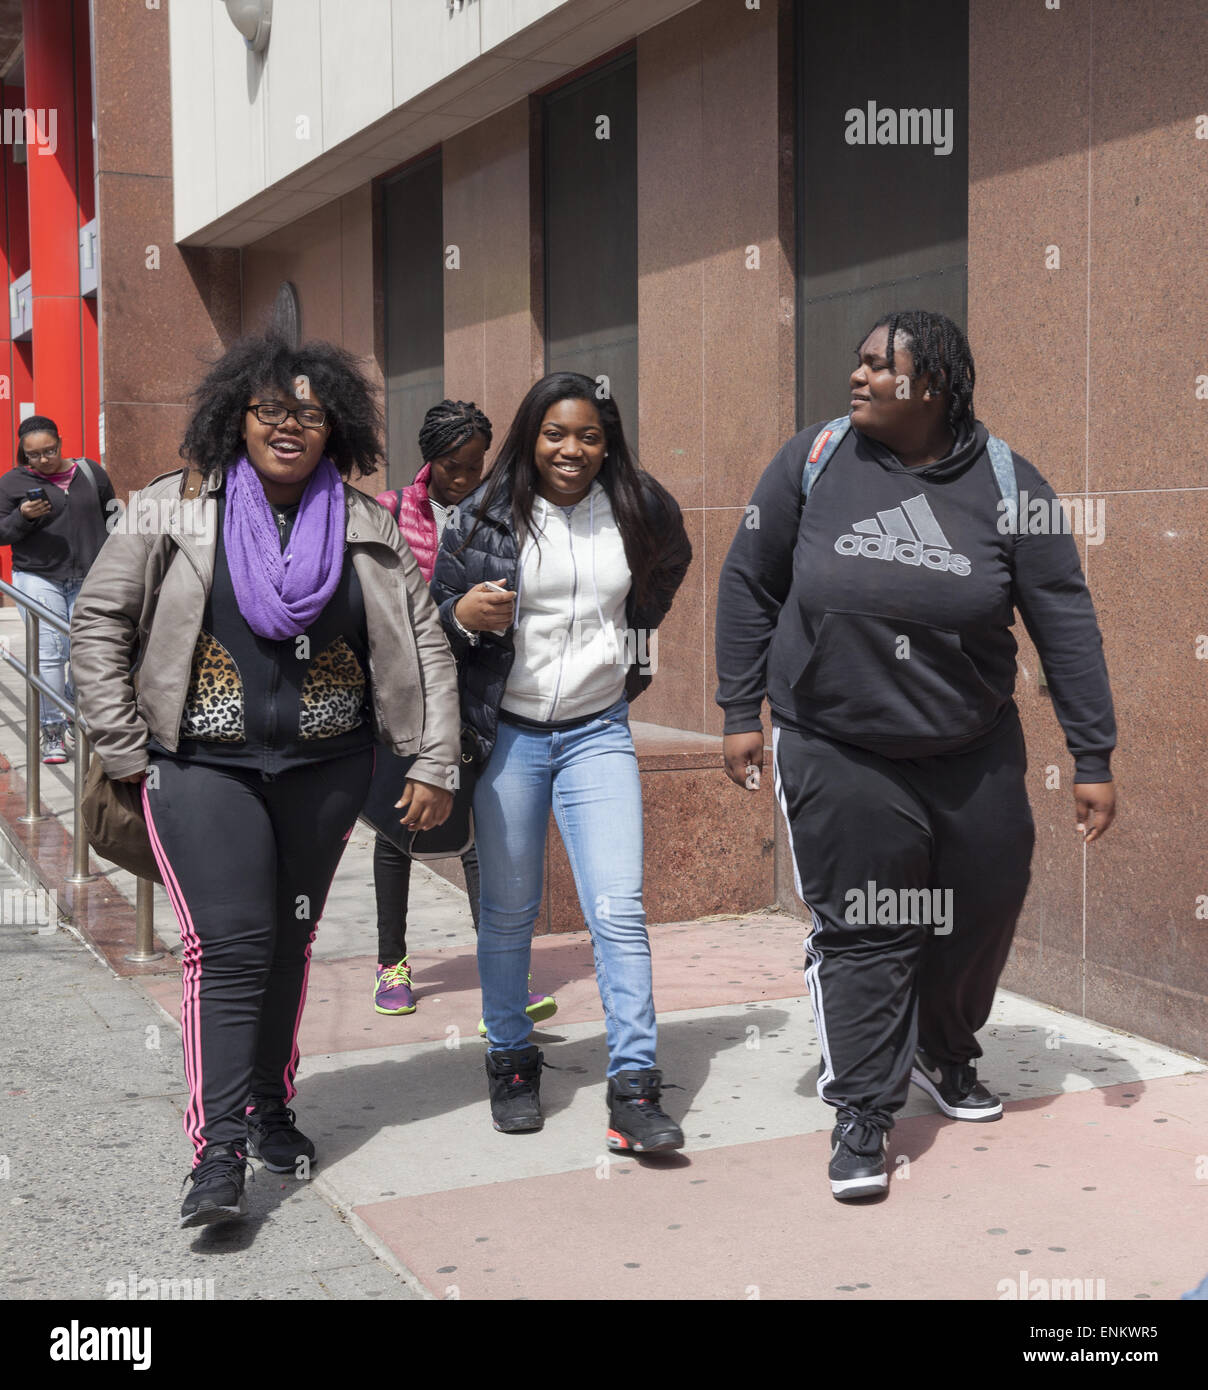 Teenage girls in downtown Brooklyn aftyer school. Many young people are overweight do to poor eating habits. Stock Photo